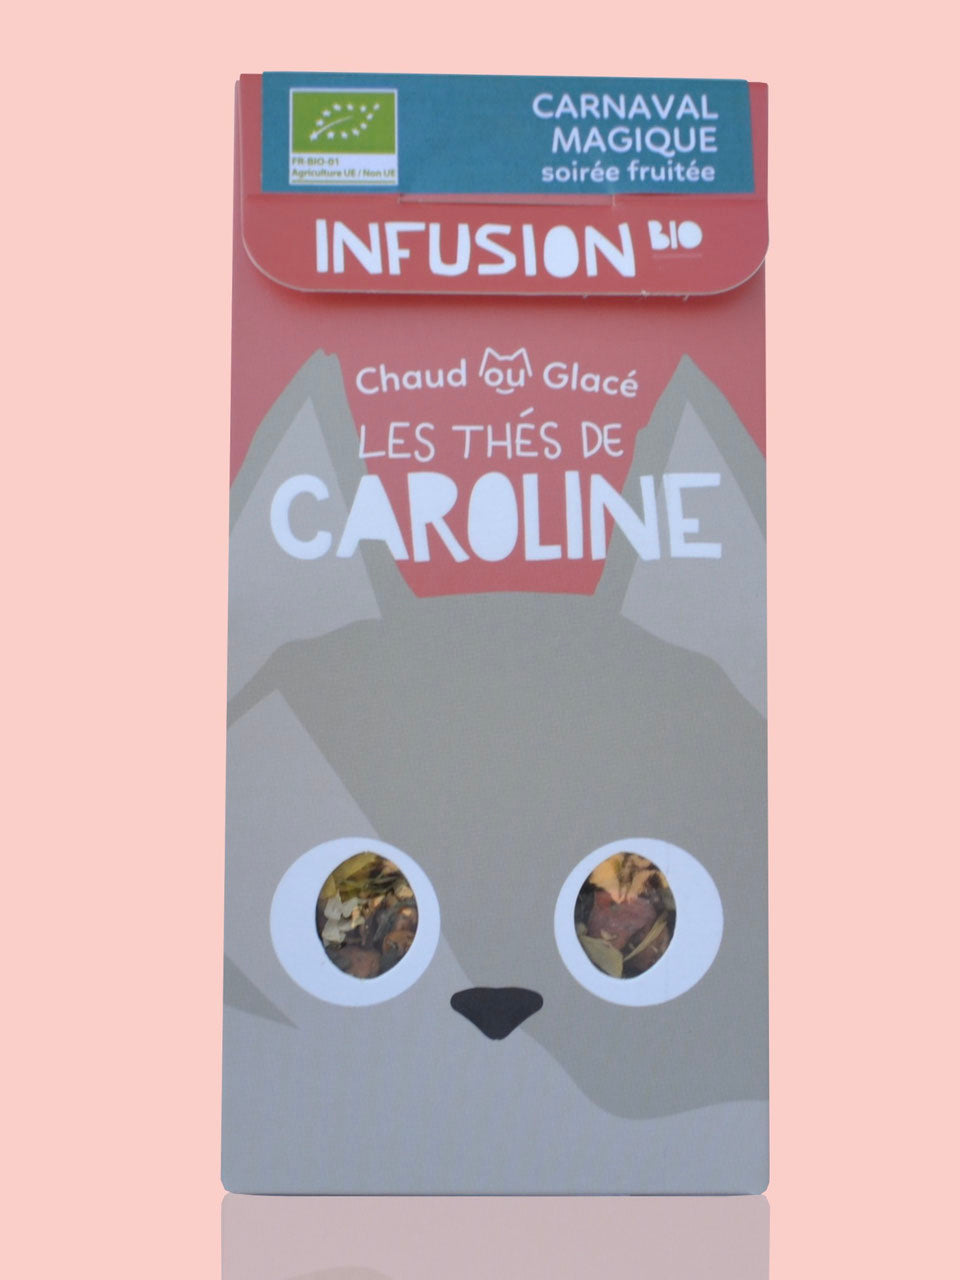 INFUSION CARNAVAL MAGIQUE